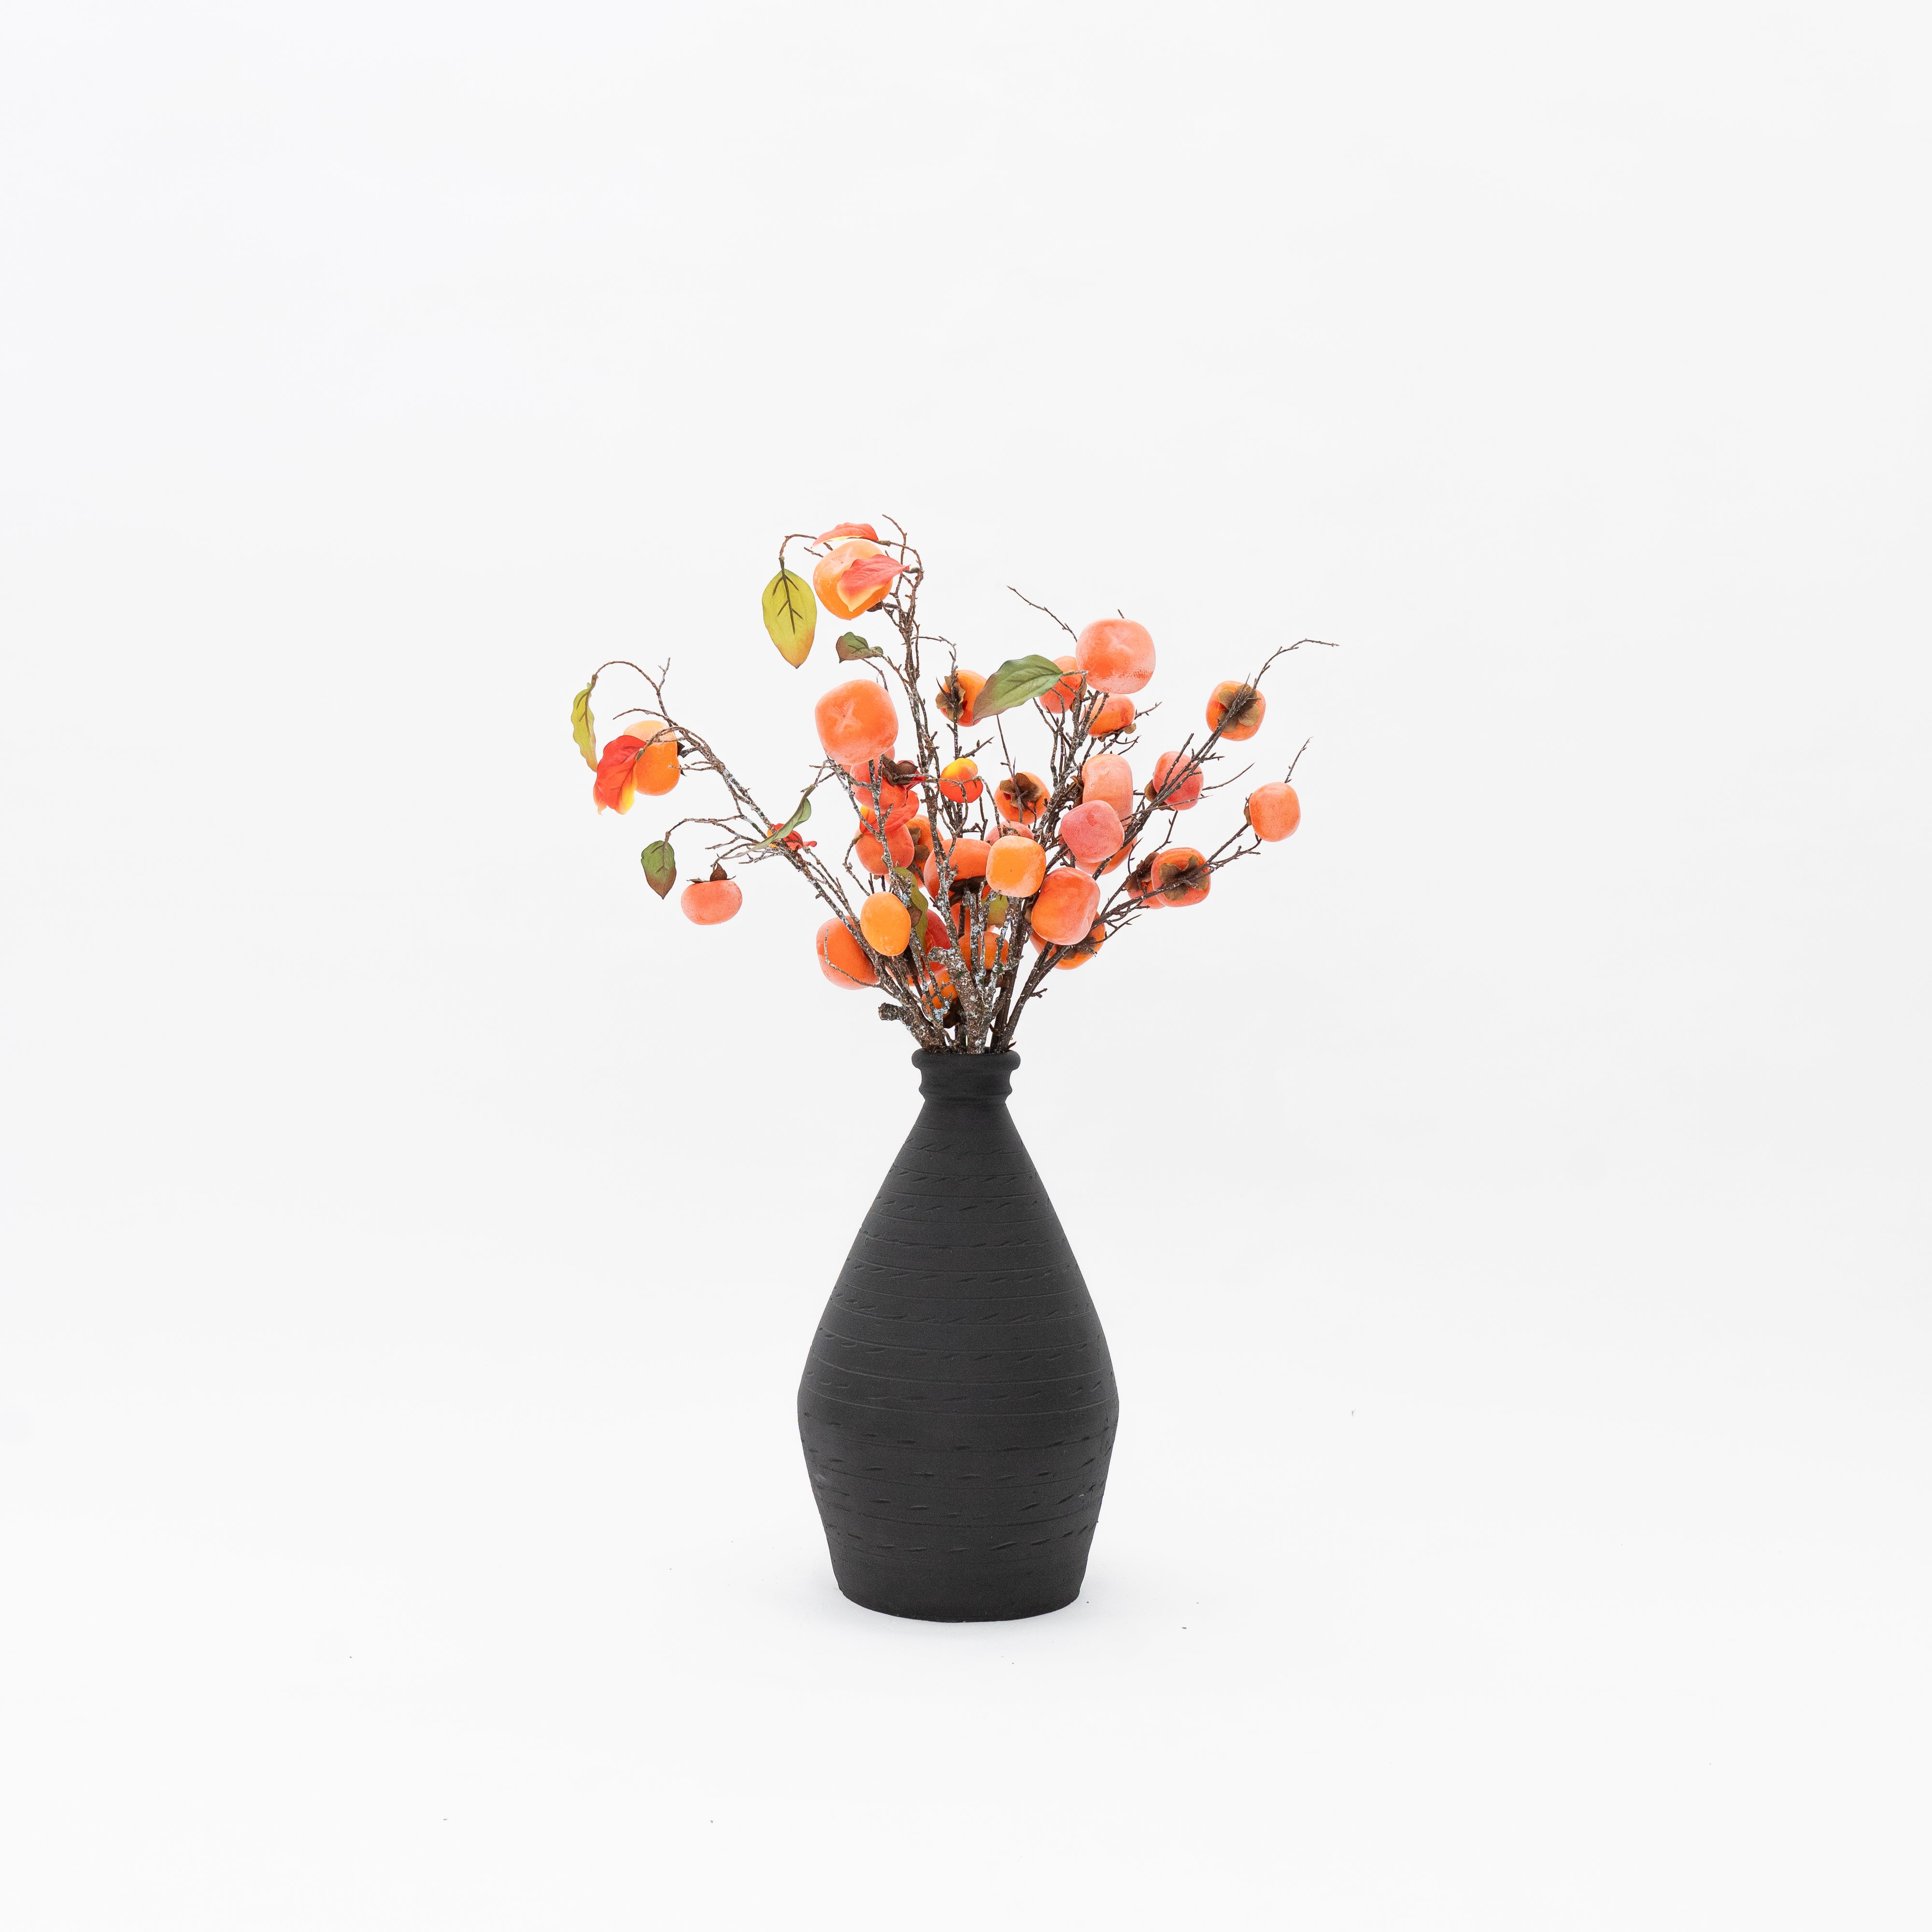 Artificial Plant - Persimmon  - WS Living - UAE - Artificial Flowers Wood and steel Furnitures - Dubai